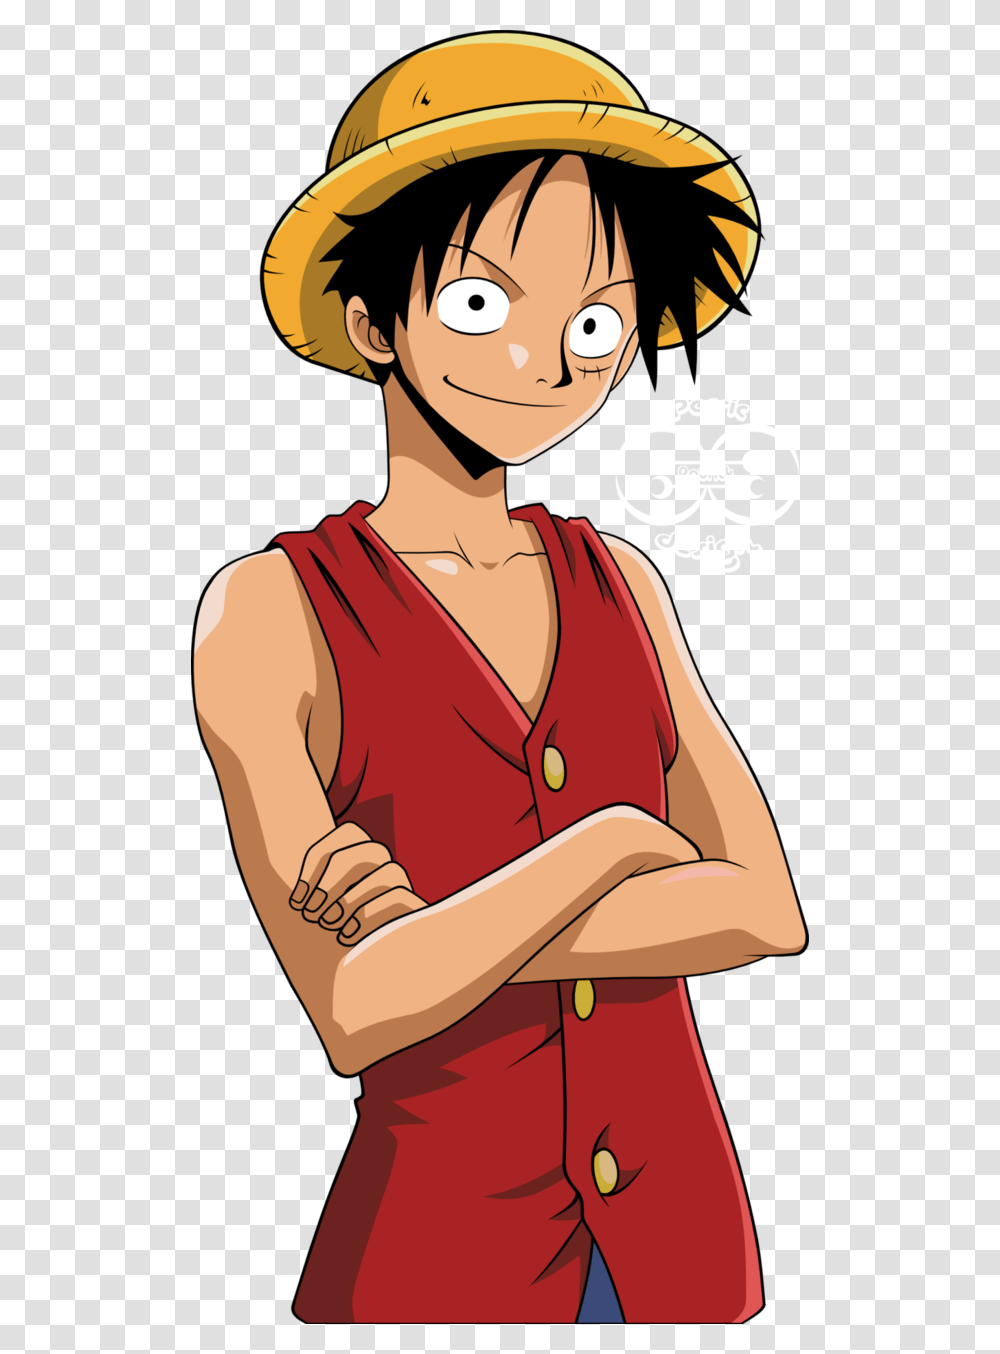 Monkey D Luffy Pic Monkey D Luffy, Helmet, Person, Label Transparent Png